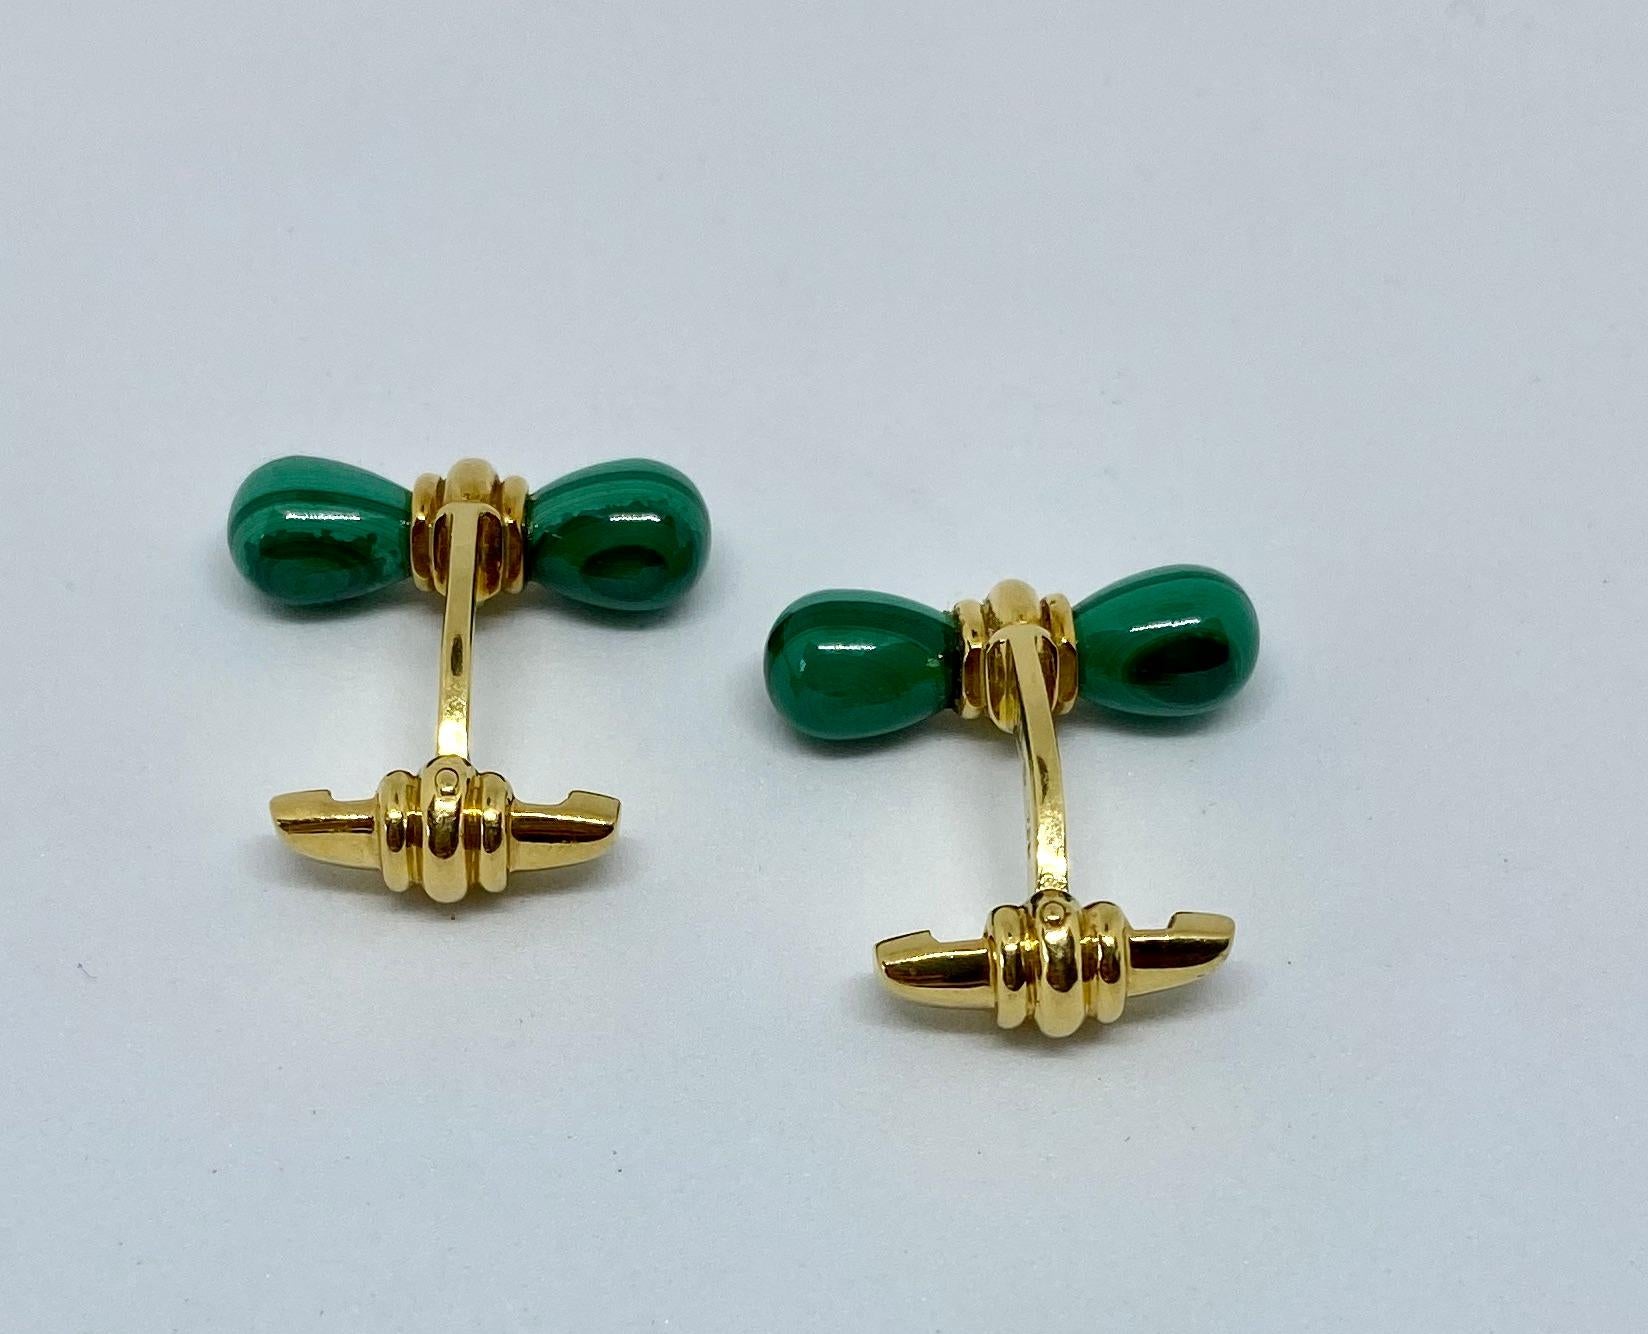 Beautiful and unusual baton-style cufflinks made in France and retailed by Alfred Dunhill. The cufflinks feature four vibrant malachites carved to highlight the stones' natural green bands, all set in 18K yellow gold.

In addition to the 